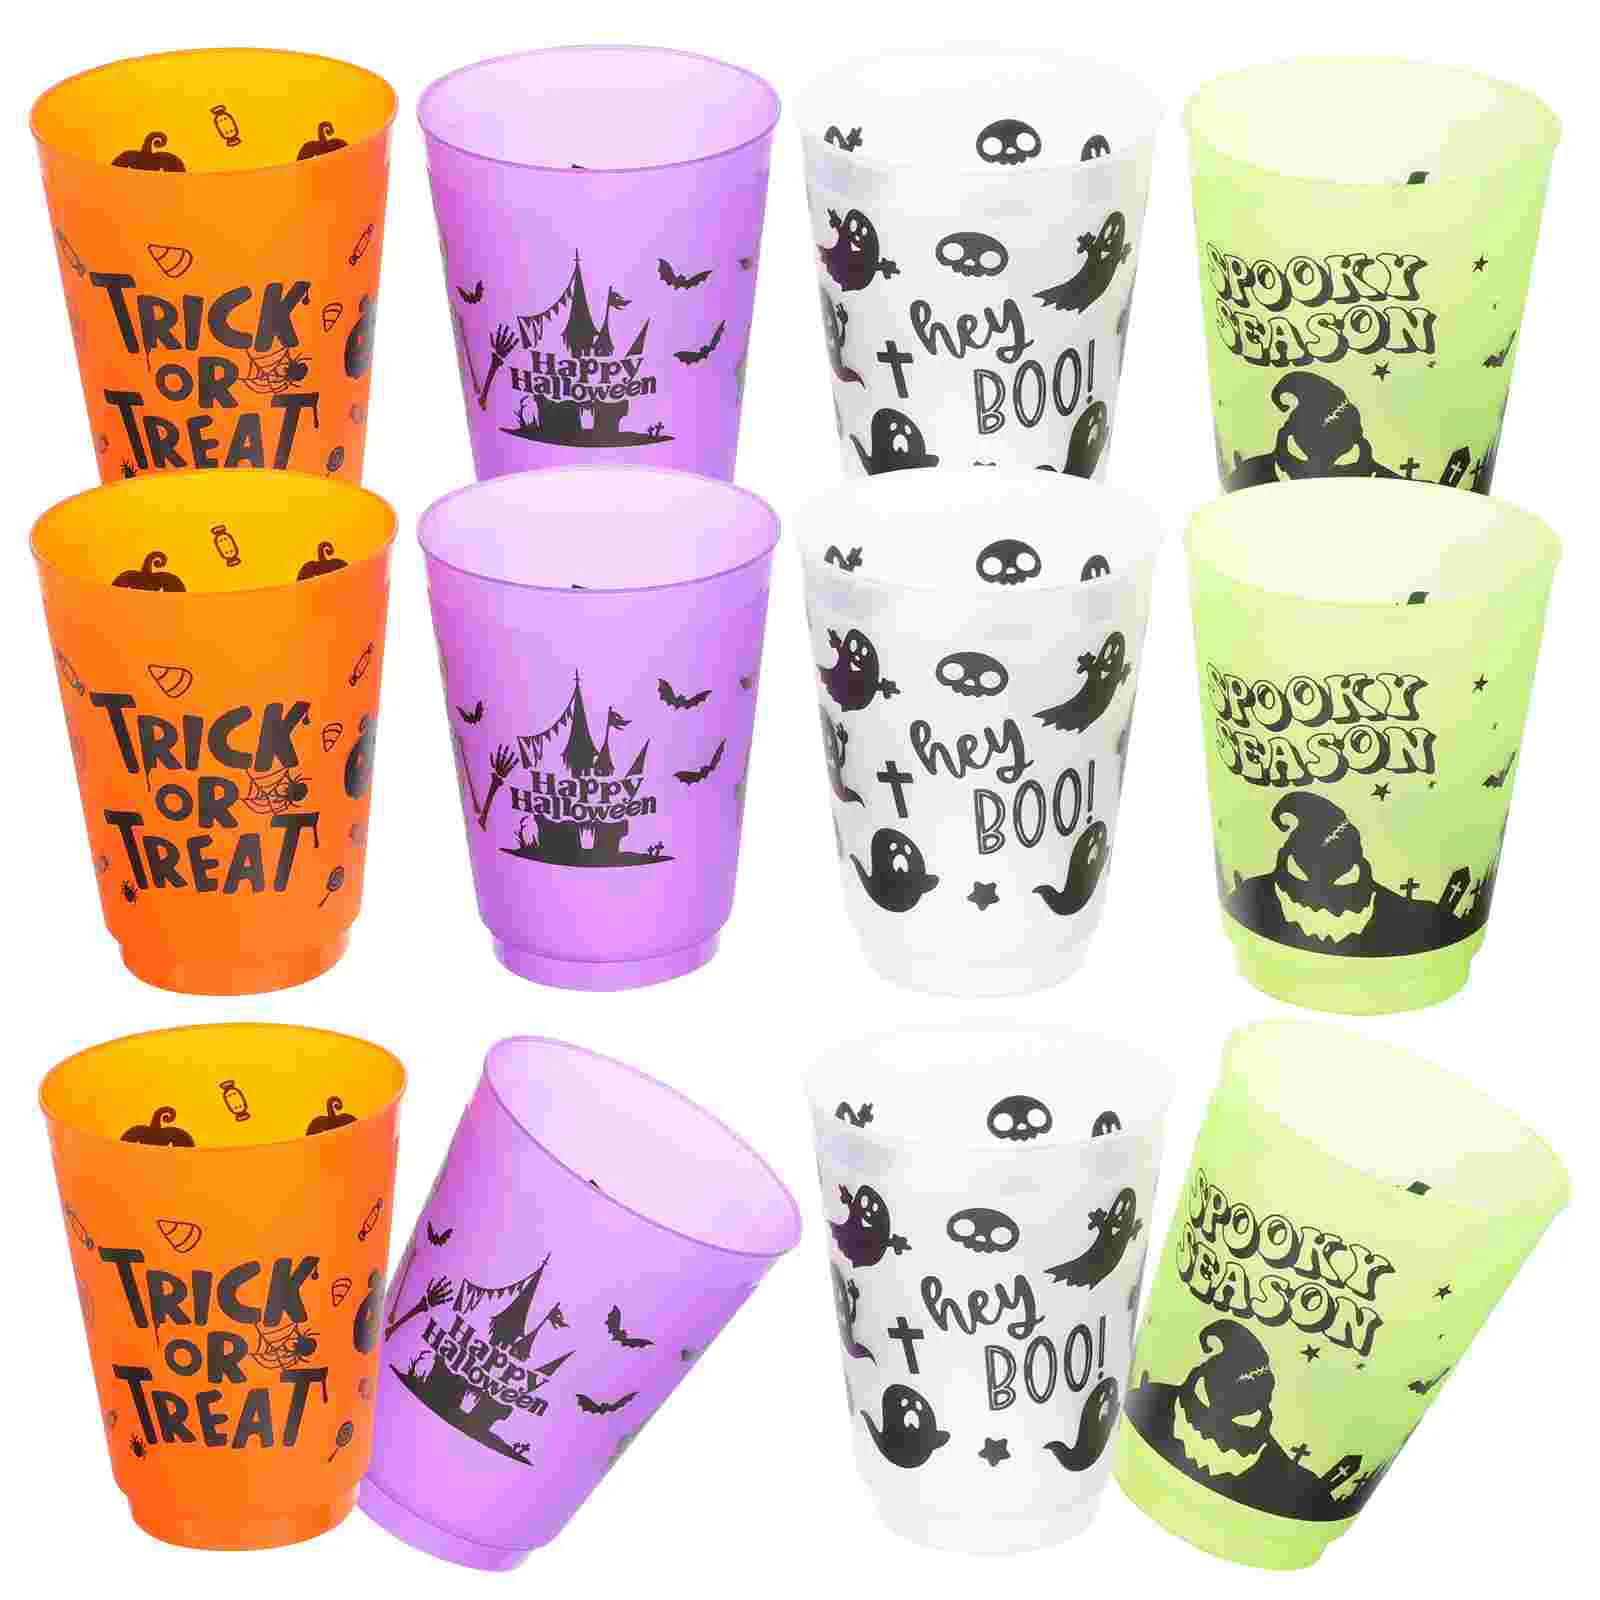 

20pcs Halloween Plastic Cups Creative Carnival Cups Drinking Reusable Cups Decoration